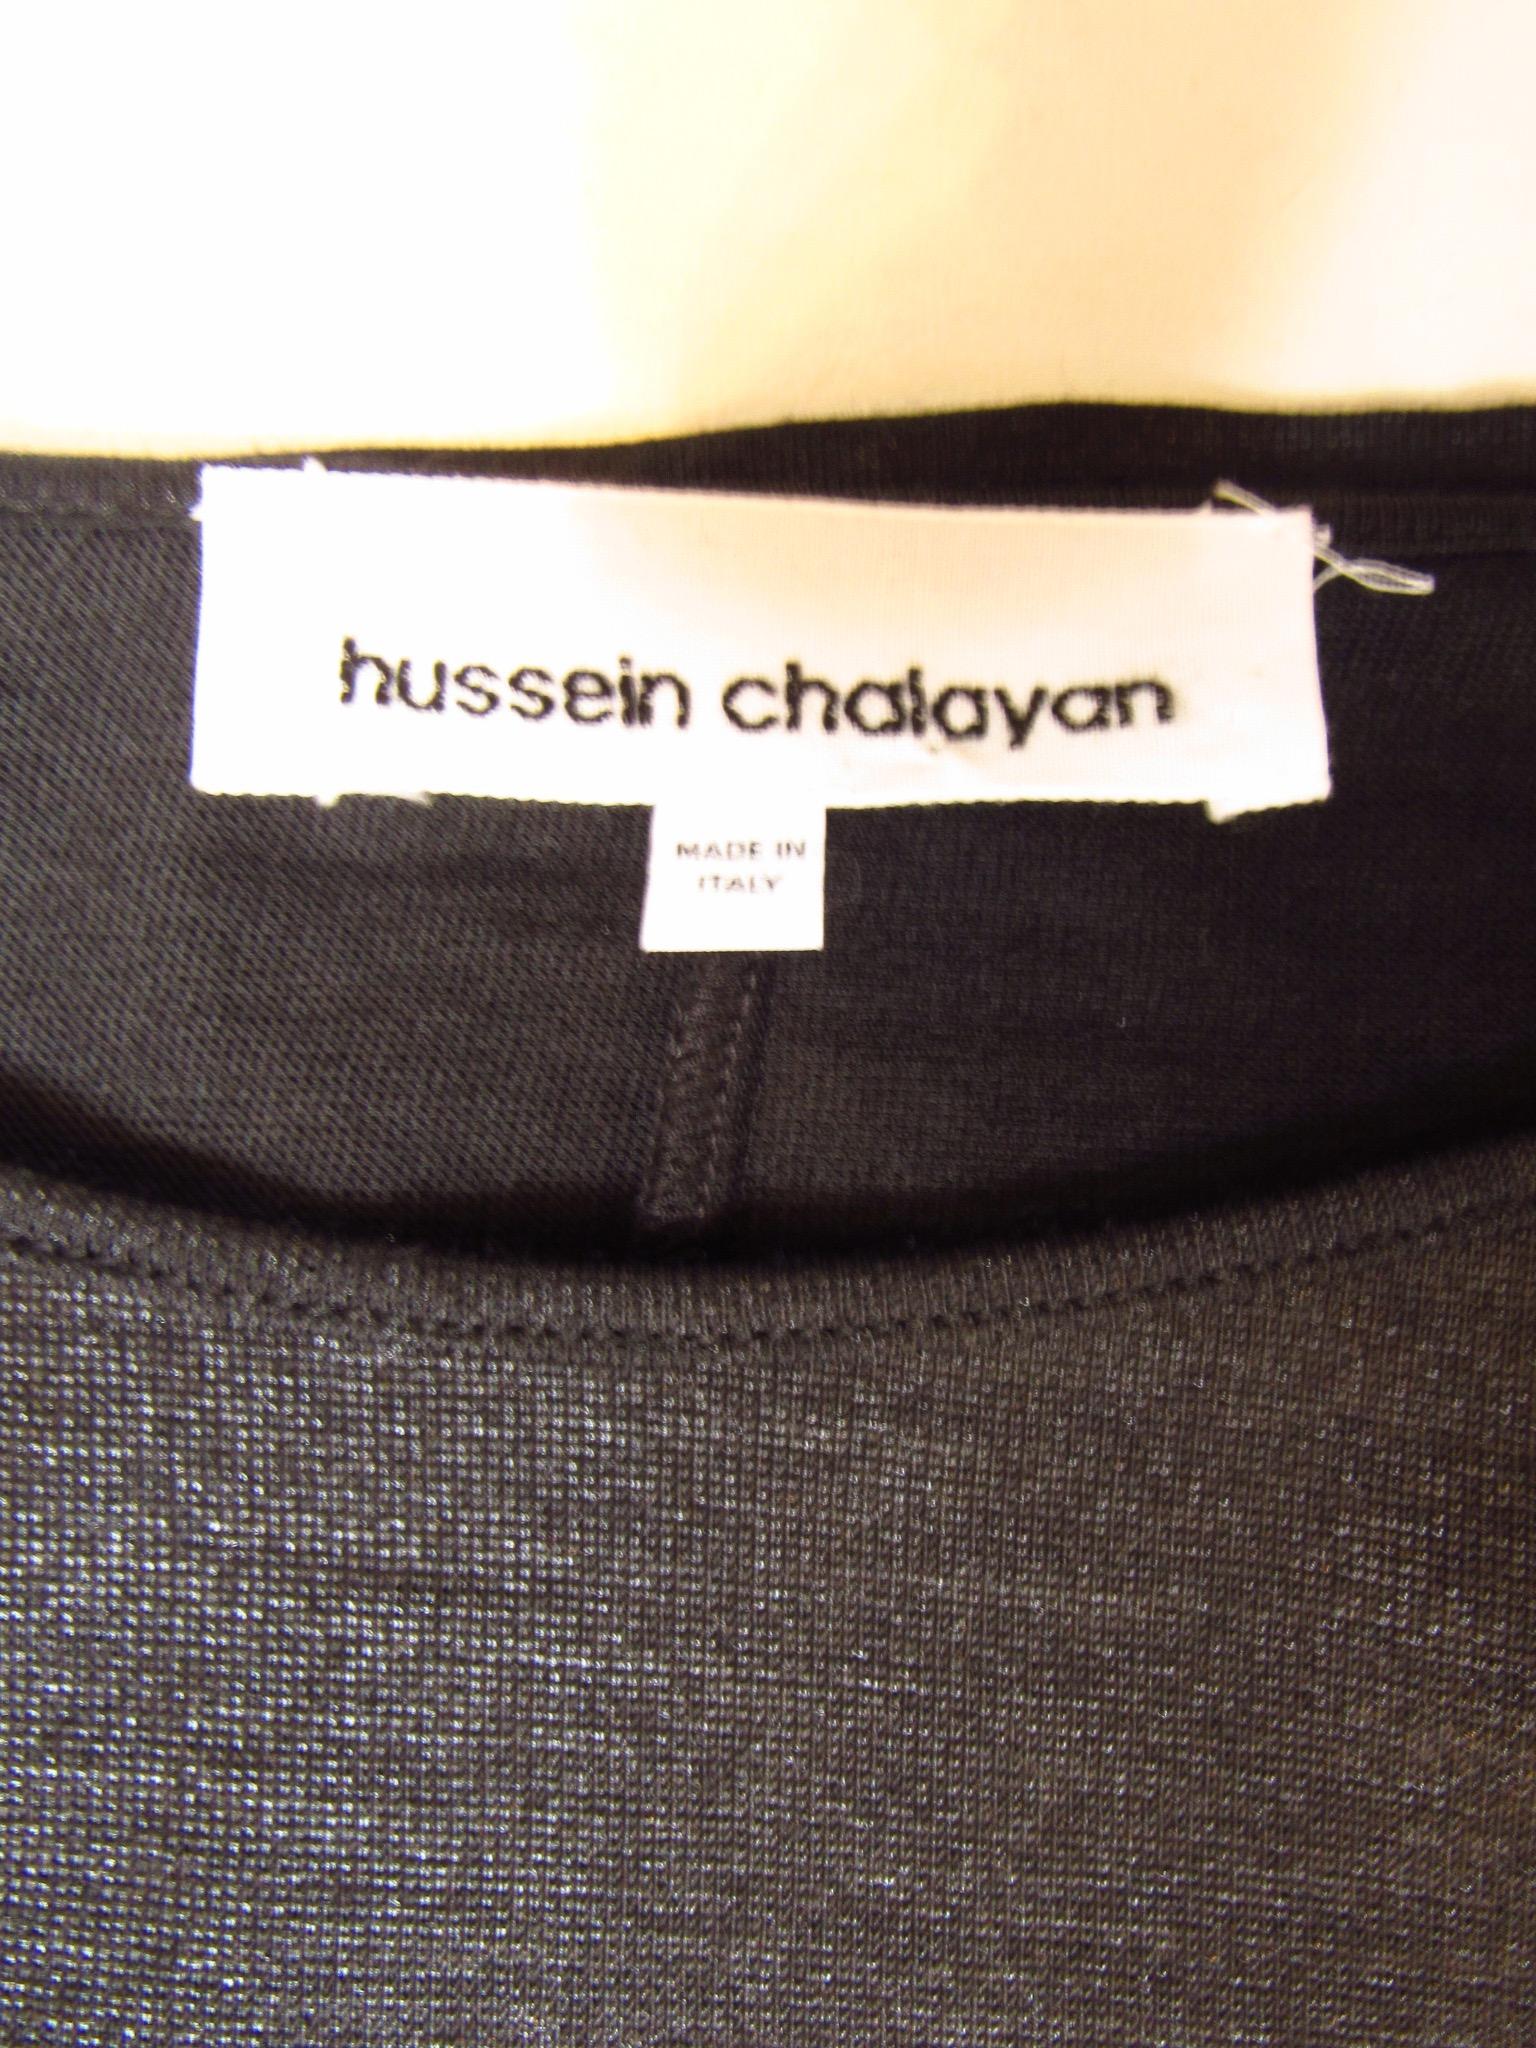 Hussein Chalayan Black and Silver Dress For Sale 3